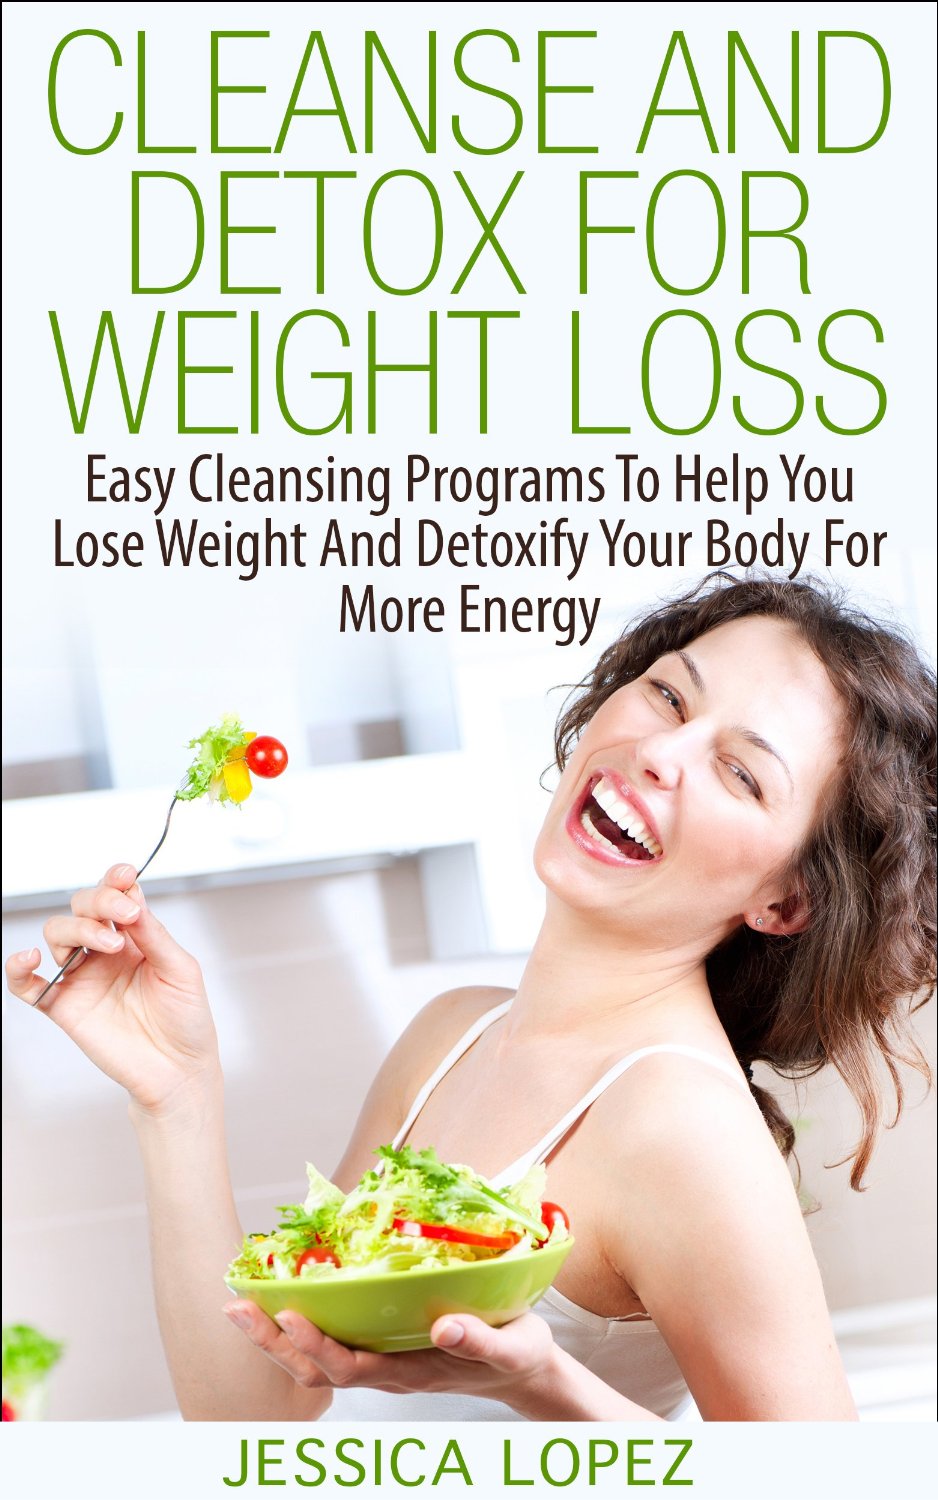 FREE: Cleanse And Detox For Weight Loss by Jessica Lopez